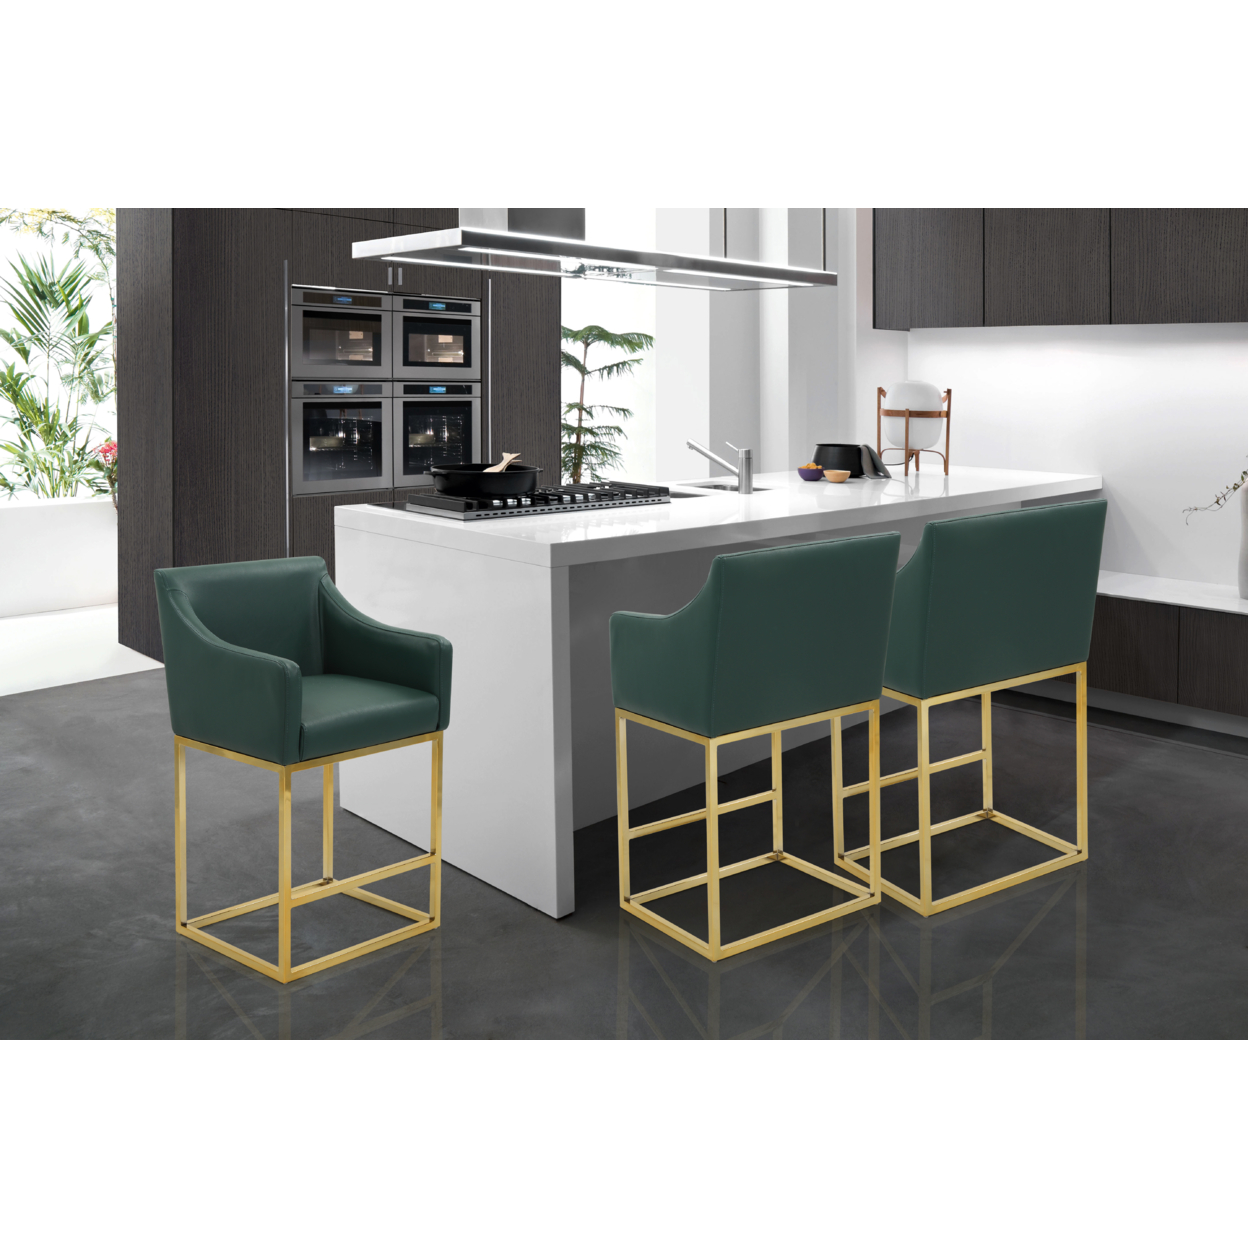 Etna Bar Stool Or Counter Stool Chair PU Leather Upholstered Slope Arm Design Architectural Goldtone Solid Metal Base - Green, Height: 38.25